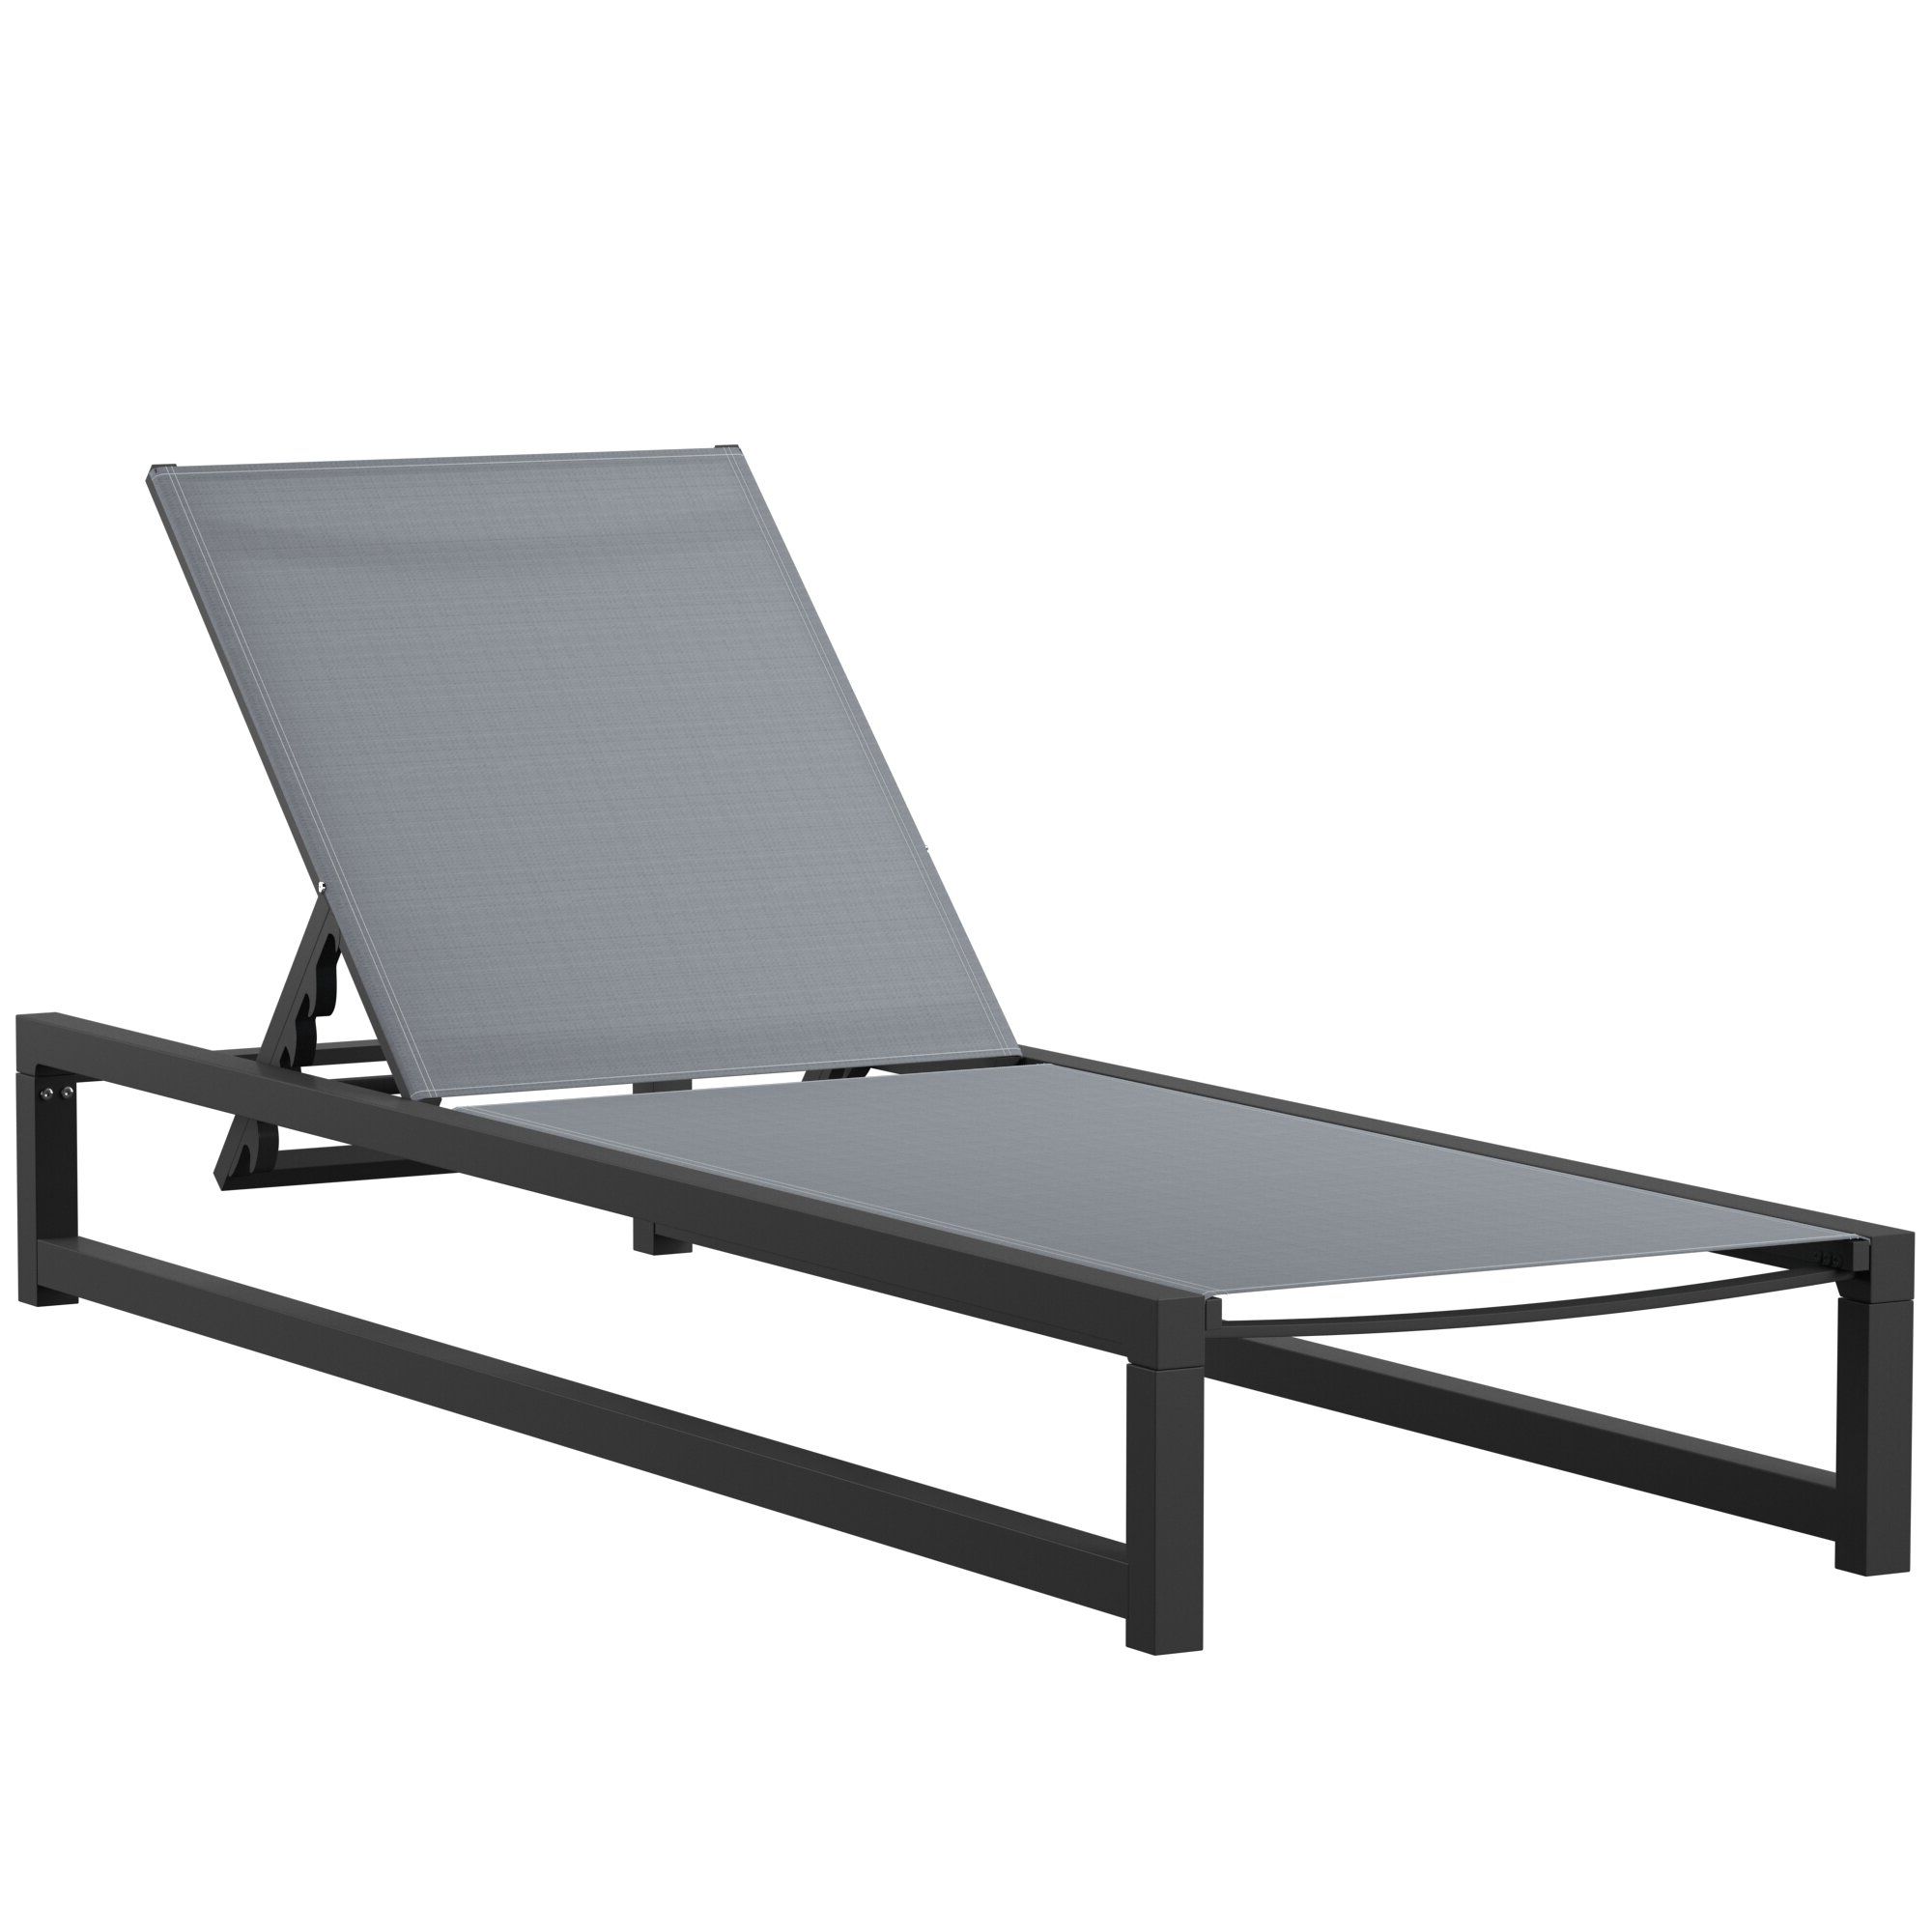 Lindenberg Reclining Chaise Lounge With Latest Resin Wicker Aluminum Multi Position Chaise Lounges (View 20 of 25)